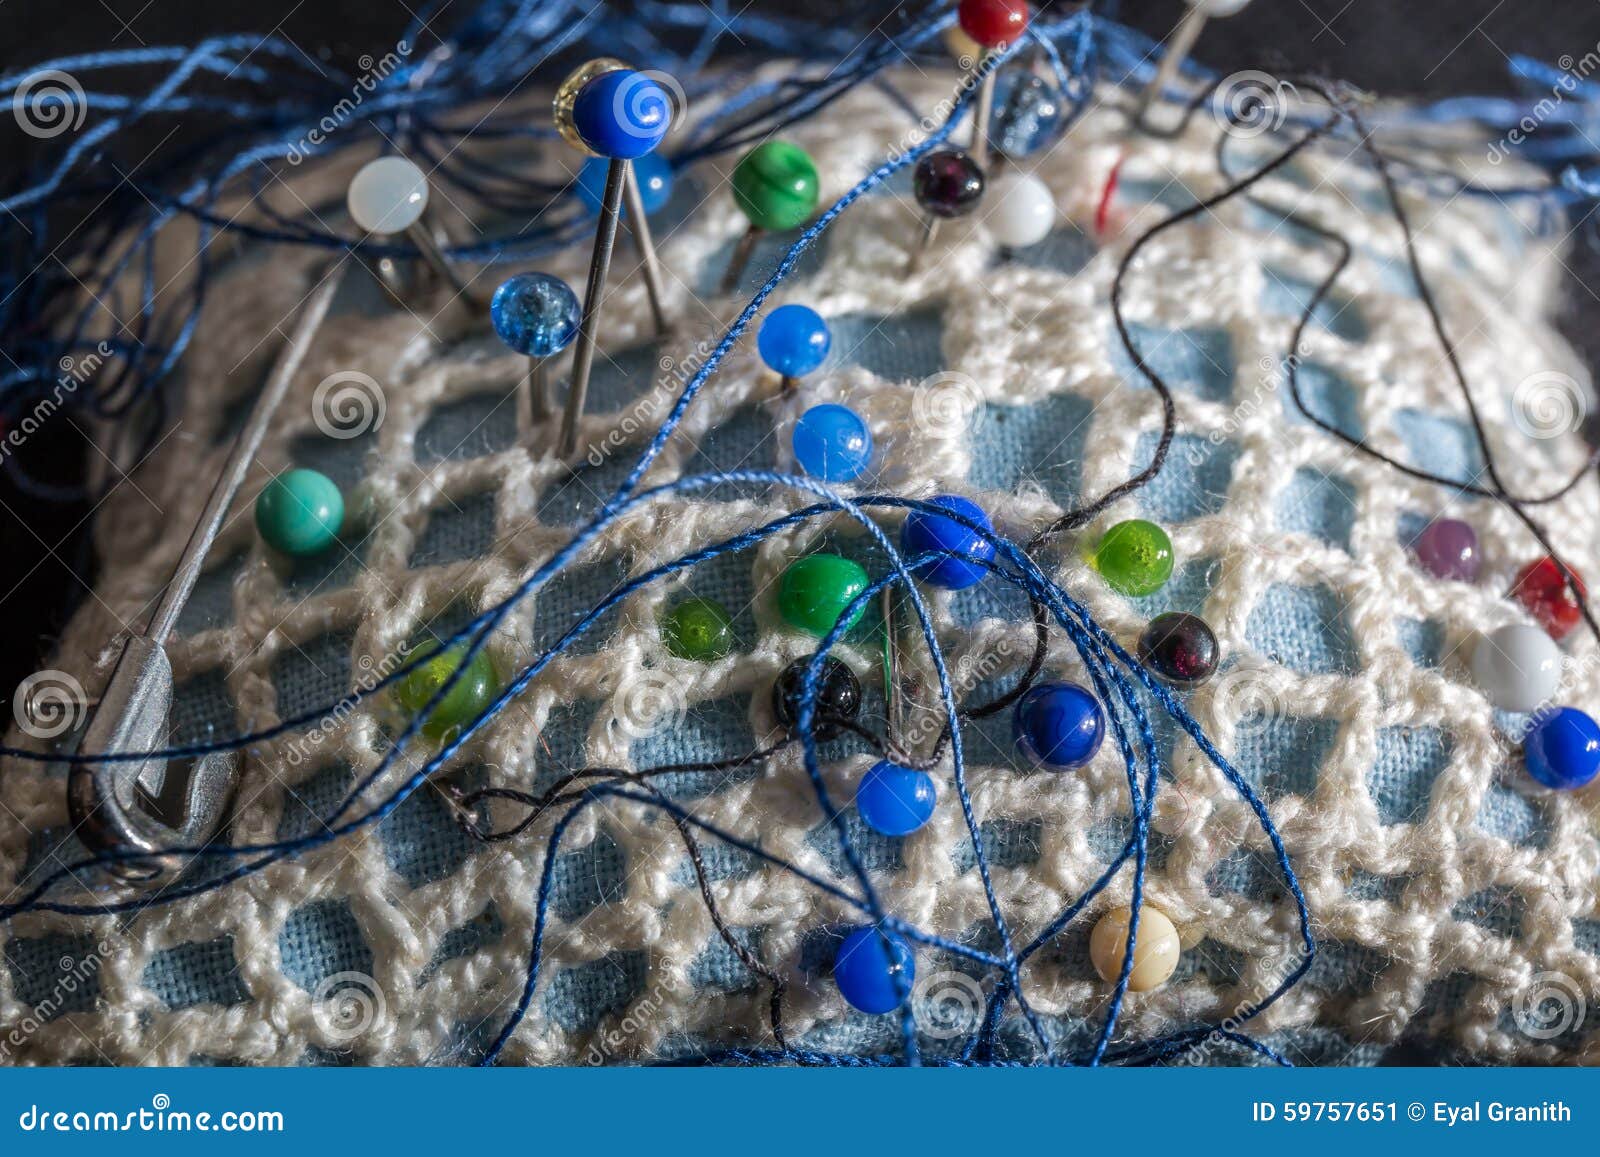 Sewing Cushion with Colored Pins Stock Image - Image of cushion ...